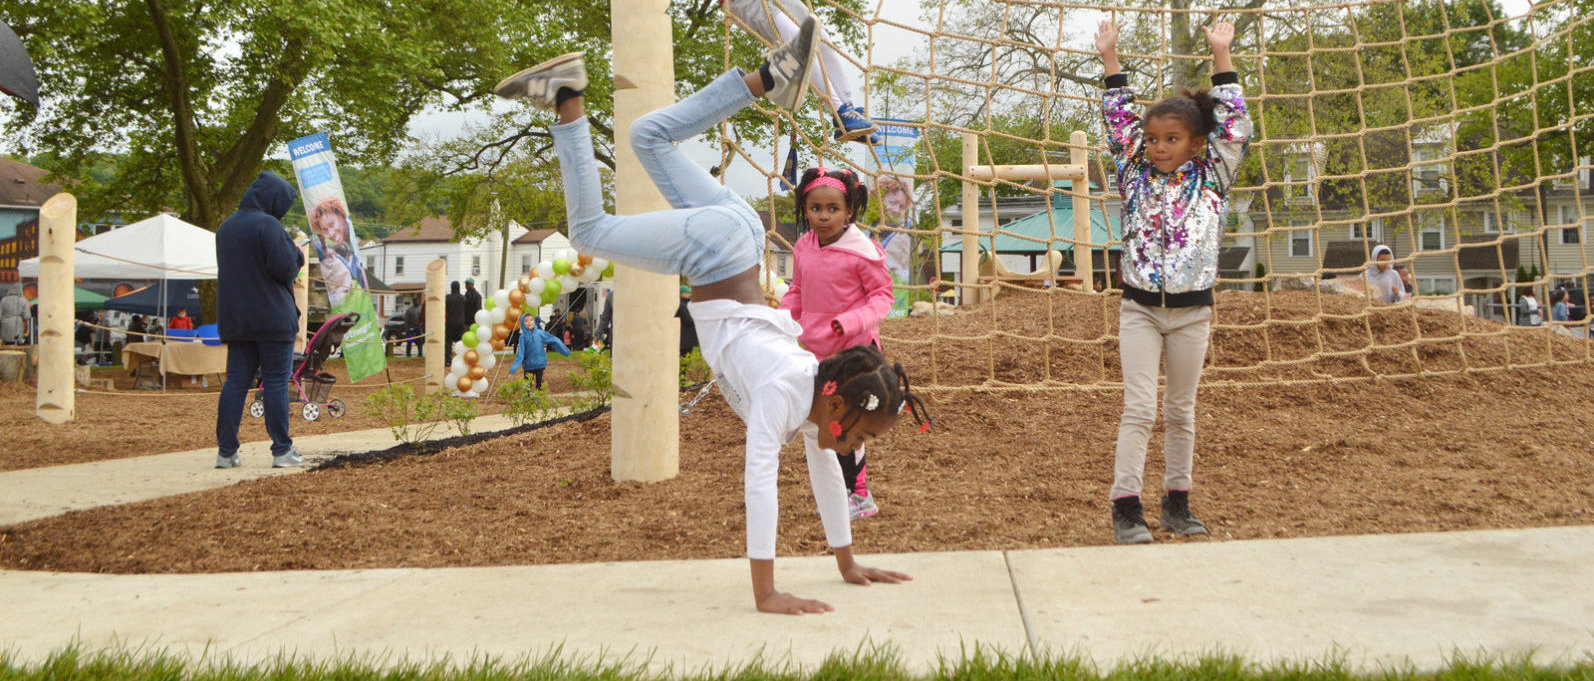 A young girl does a hand stand on a sidewalk at a playground in front of other children.